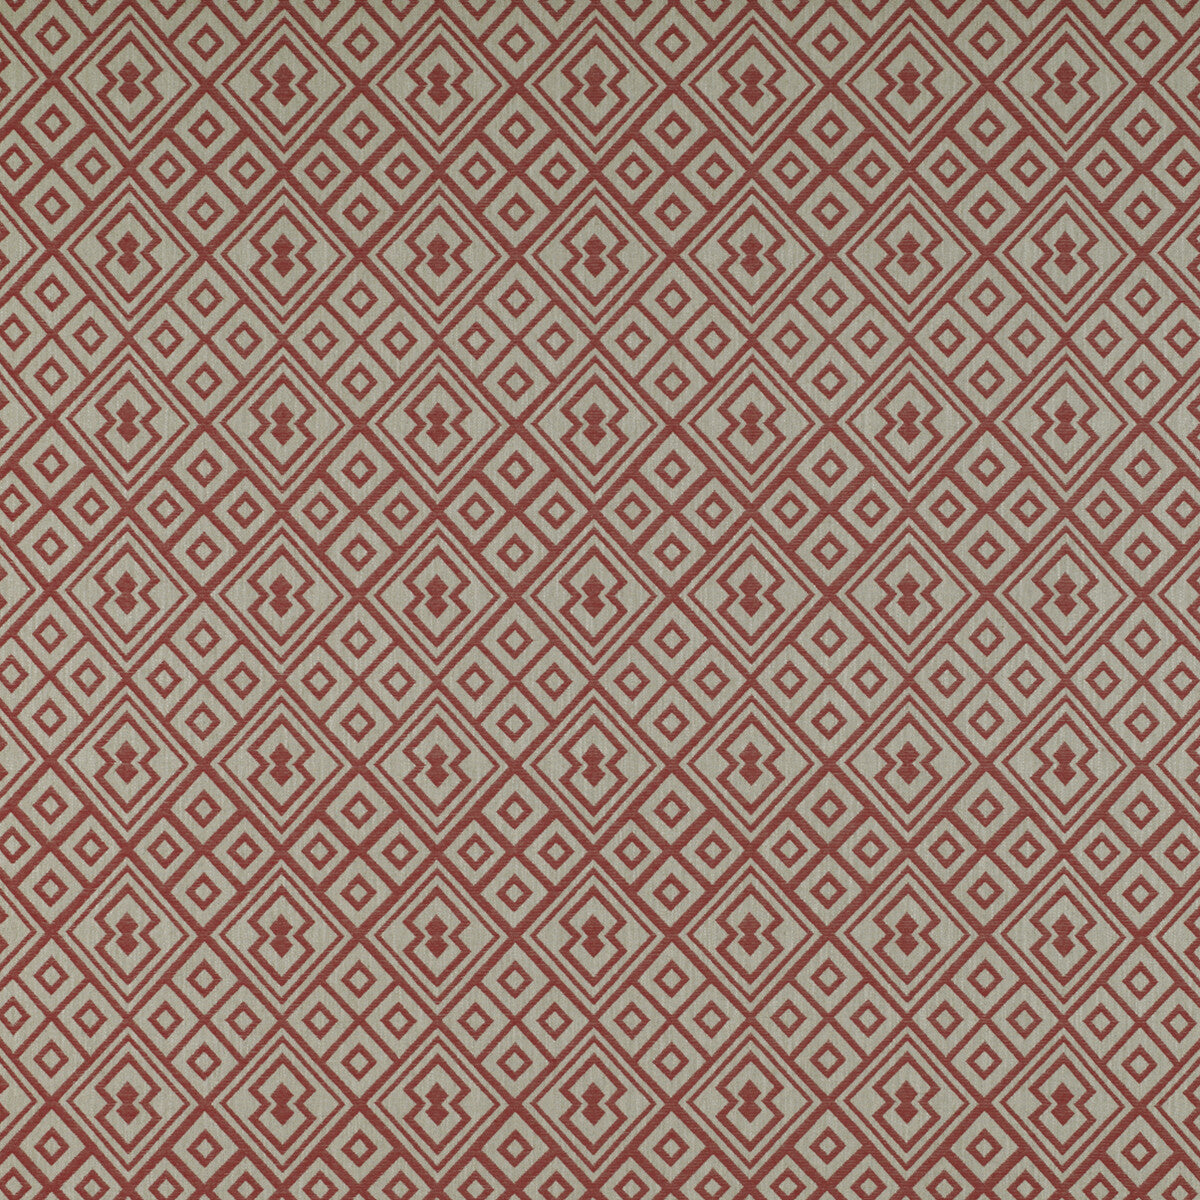 Bergamo fabric in rojo color - pattern GDT5325.004.0 - by Gaston y Daniela in the Tierras collection